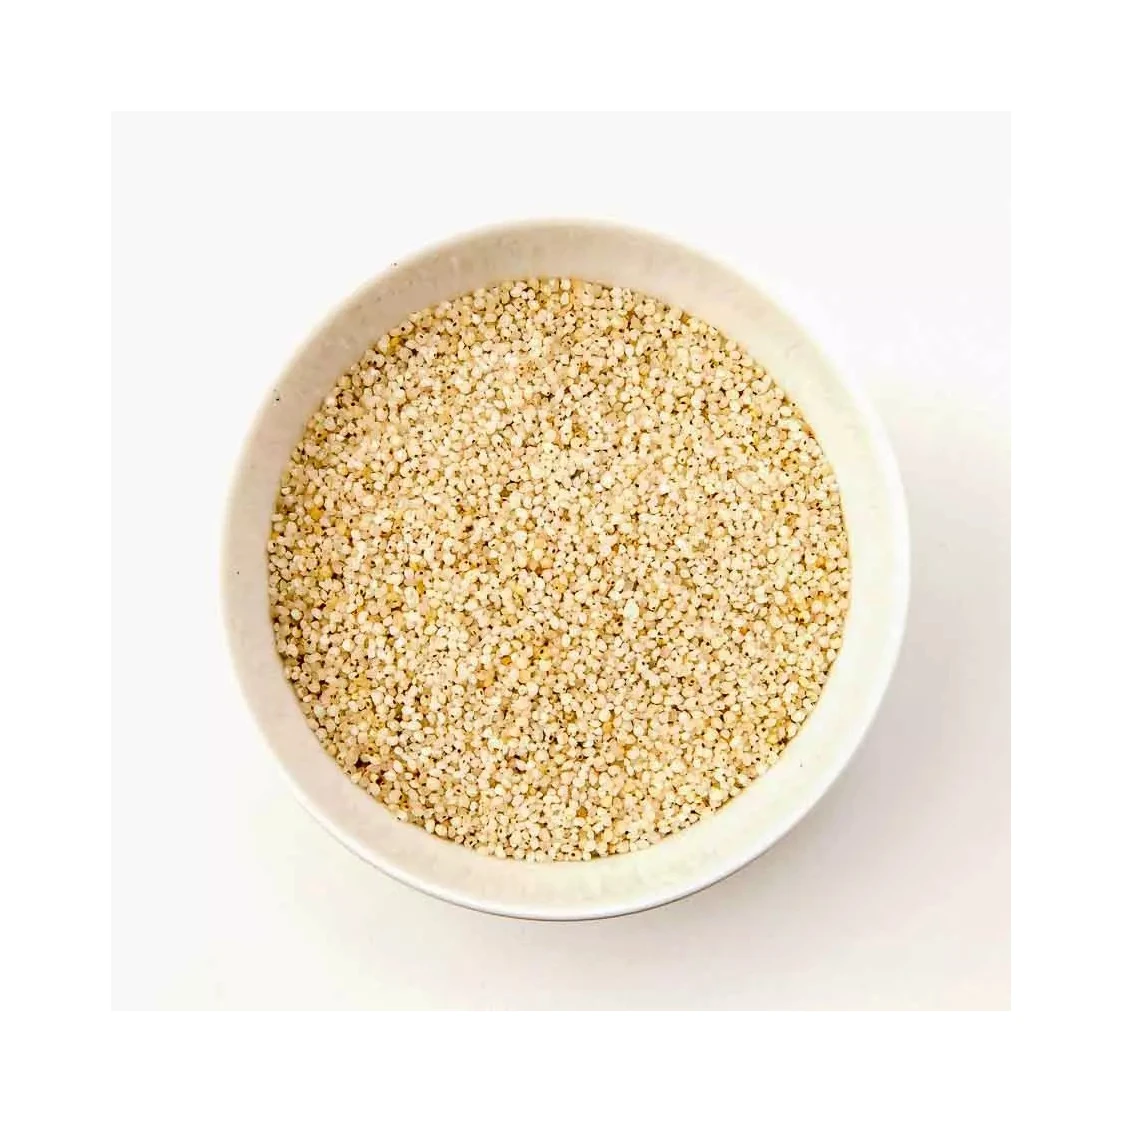 Yellow Millet Yellow Broomcorn For Bird Seeds With Millet Seeds